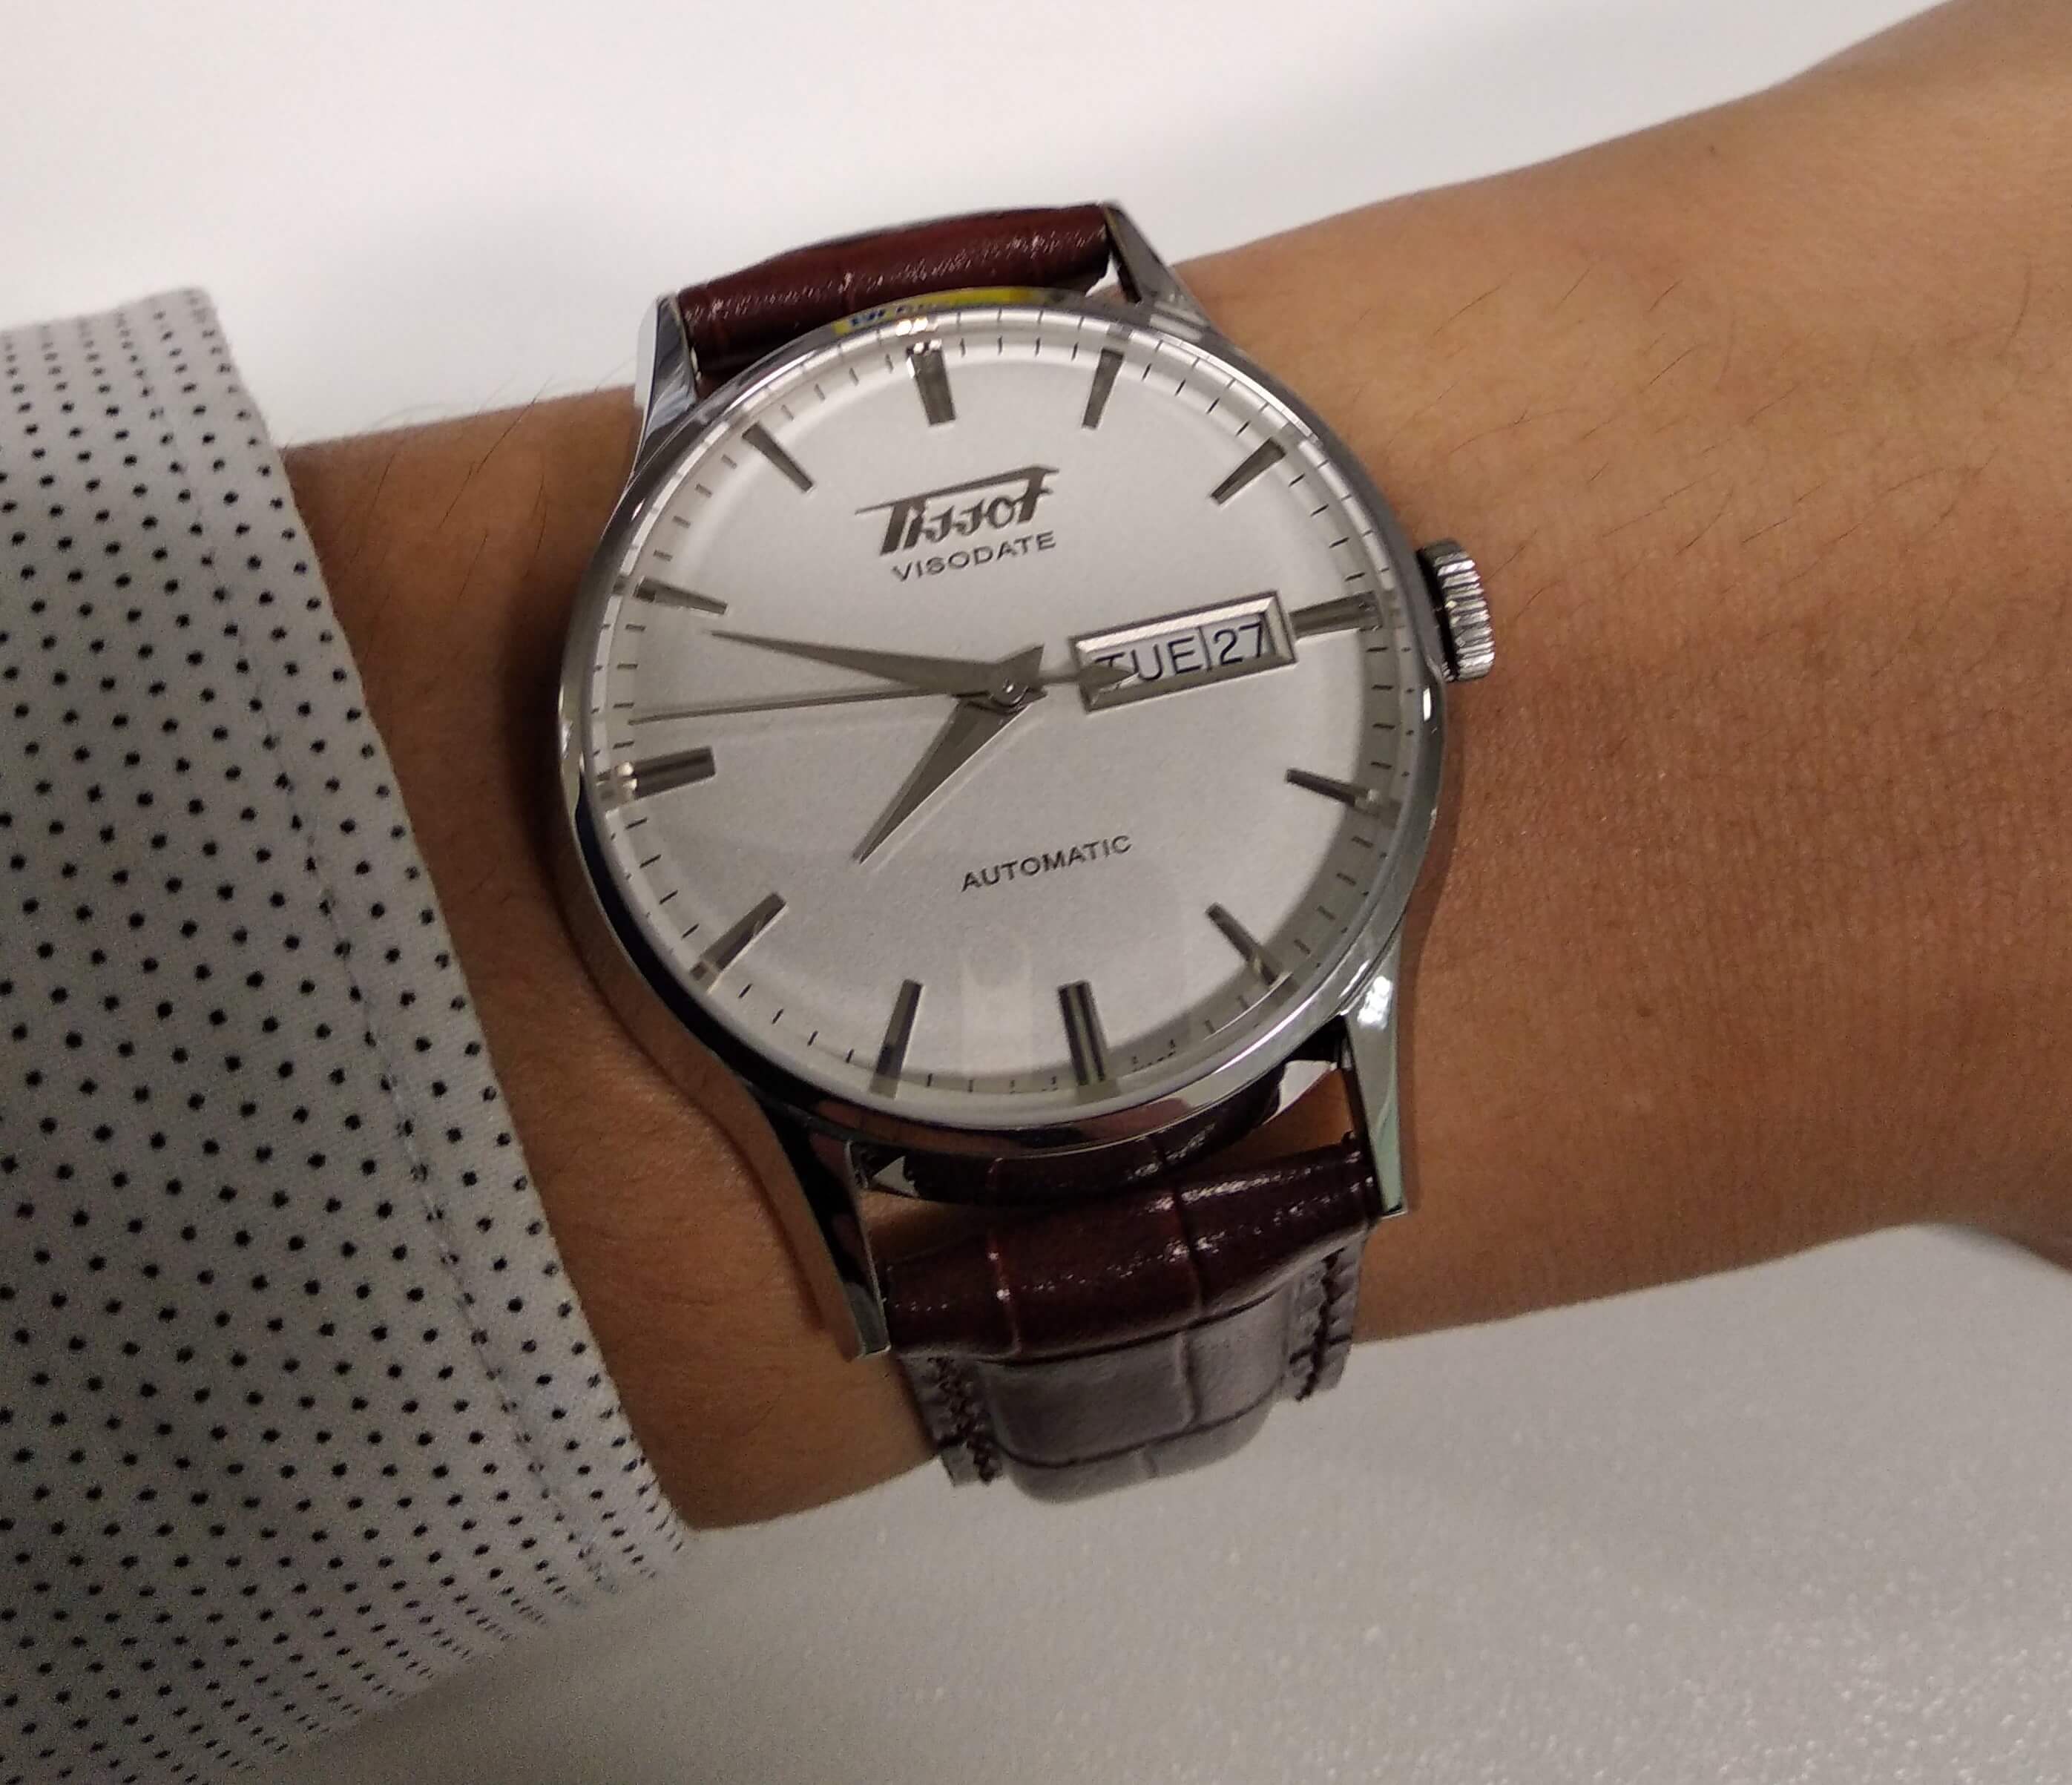 Tissot Visodate: An Owner's Honest Review | Automatic Watches For Men